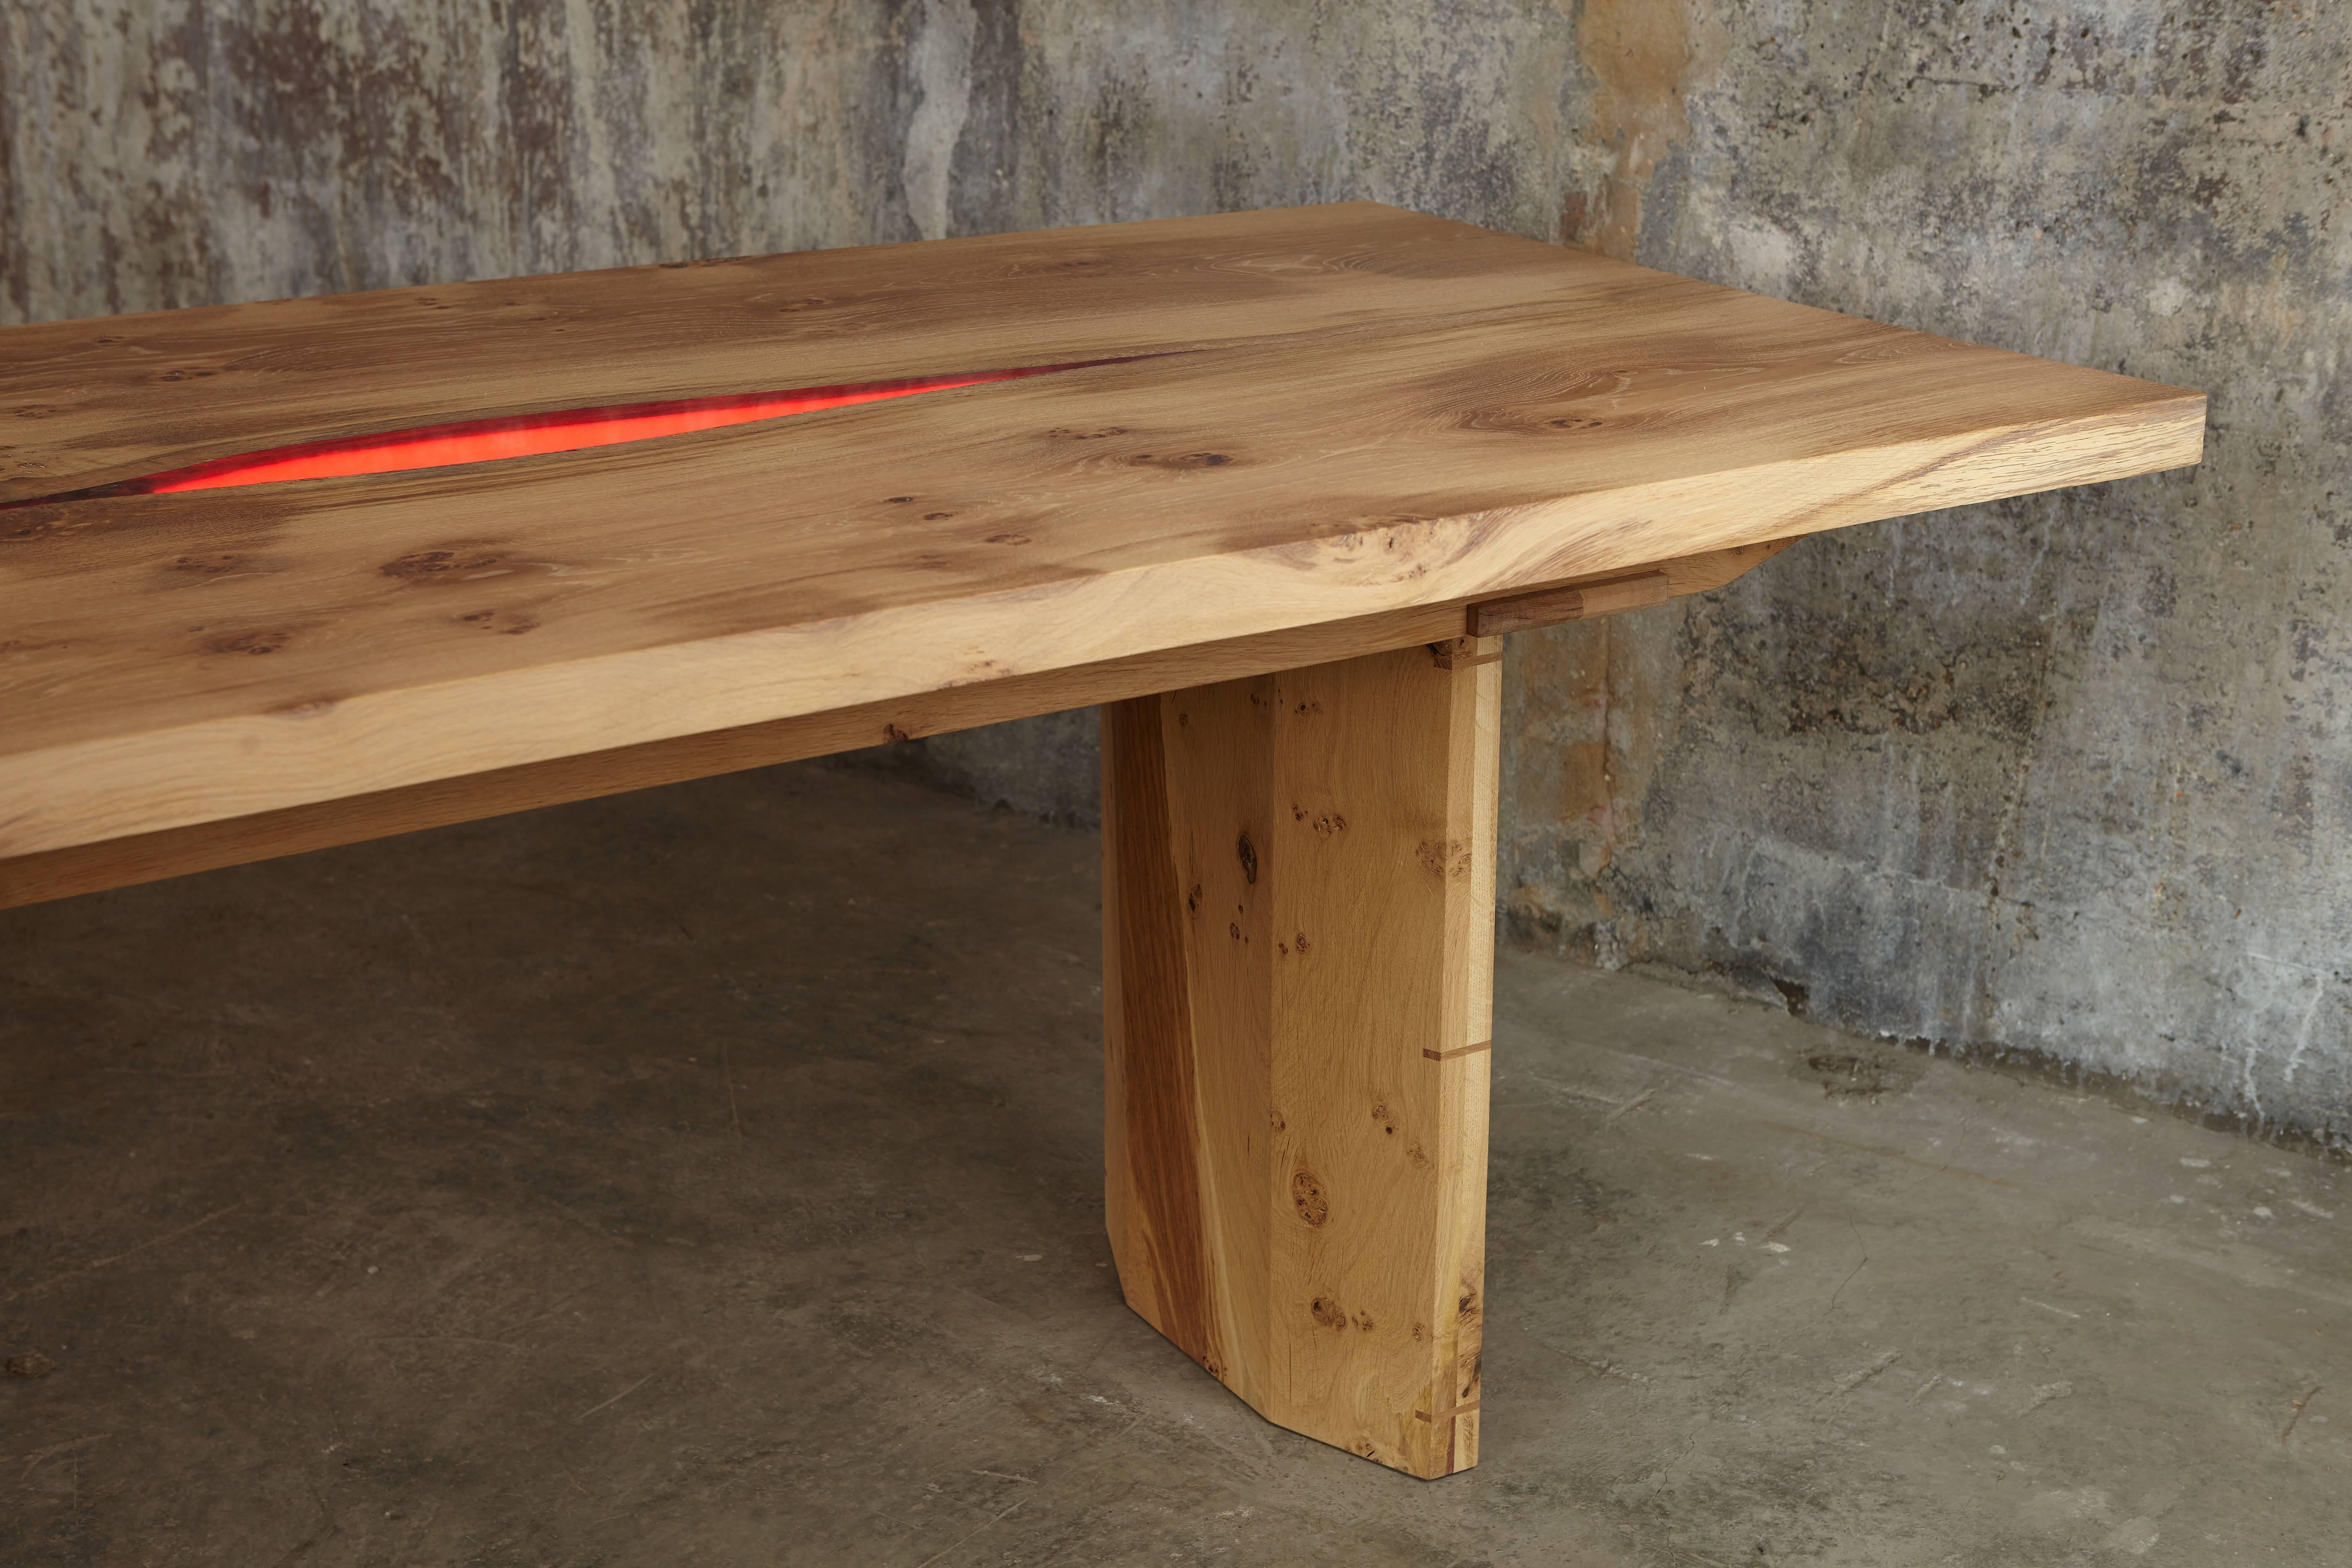 Made from solid English oak. The two tables are designed to sit end to end giving a total length of 5.2 metres / 17ft or positioned apart. The book-matched inverted live edge central section has been infilled with a clear resin which is backlit with